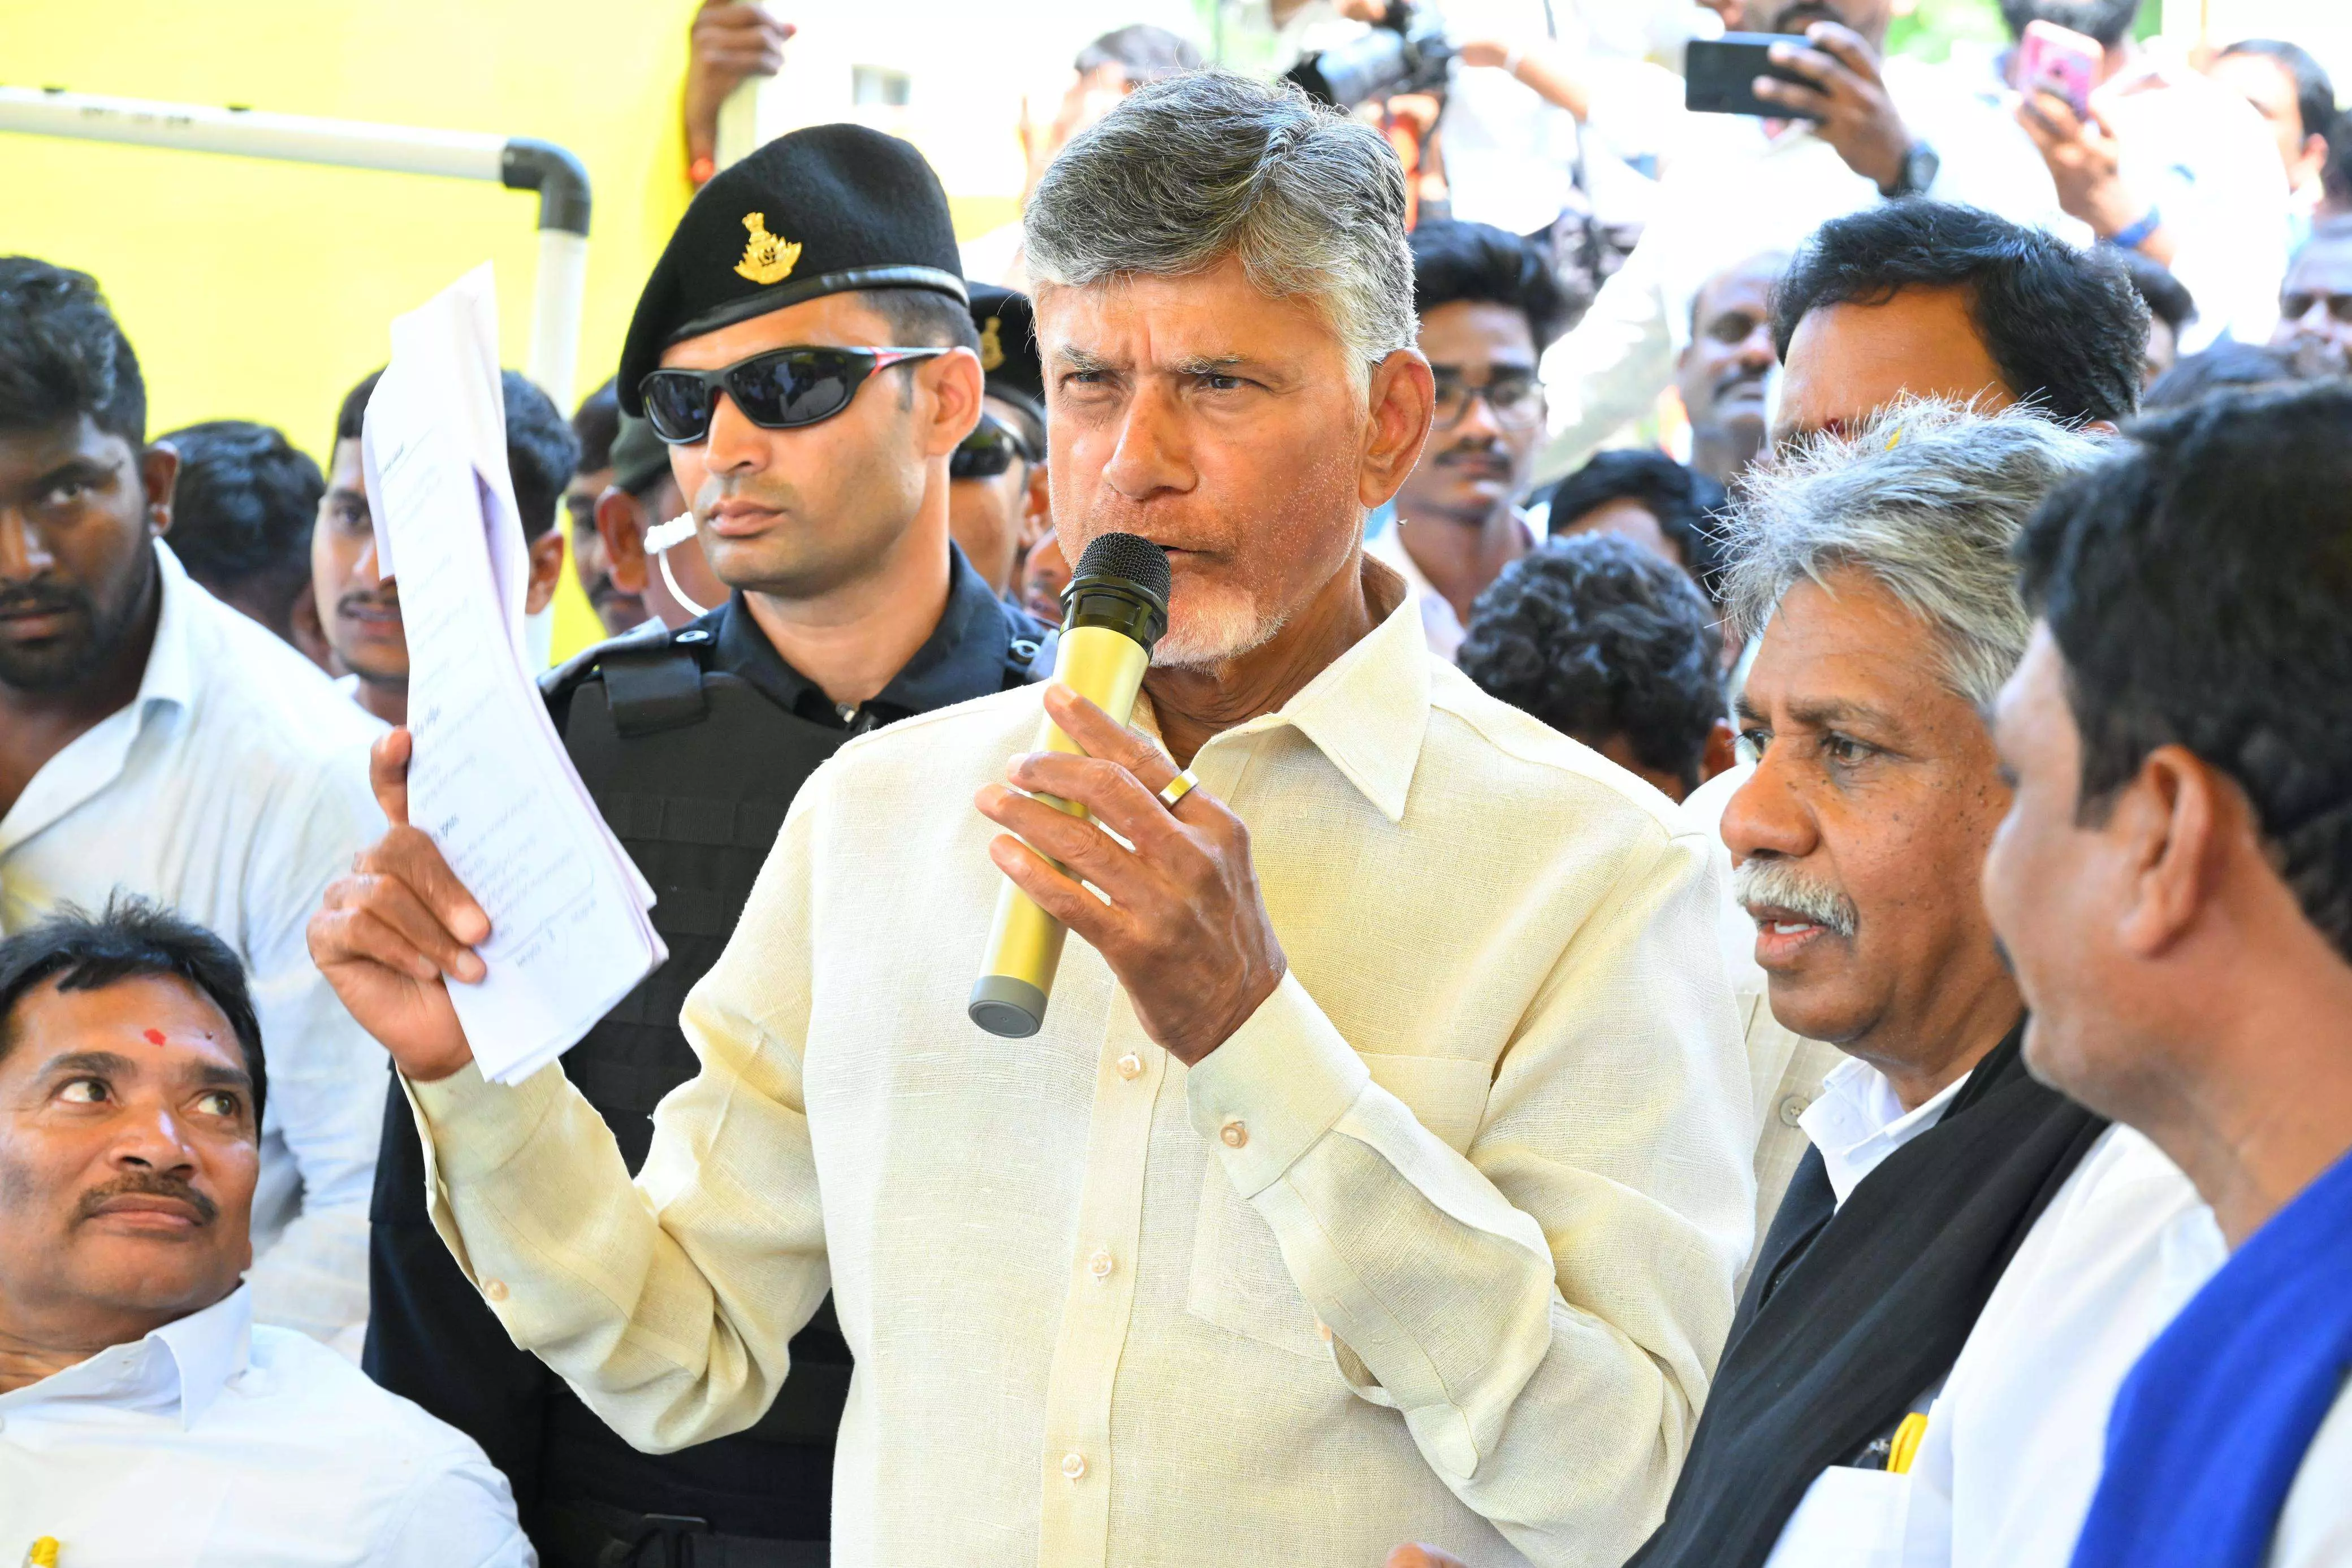 Chandrababu Naidu announces Rs 6,000 pension for differently abled, condemns burning of TDP office in Palnadu